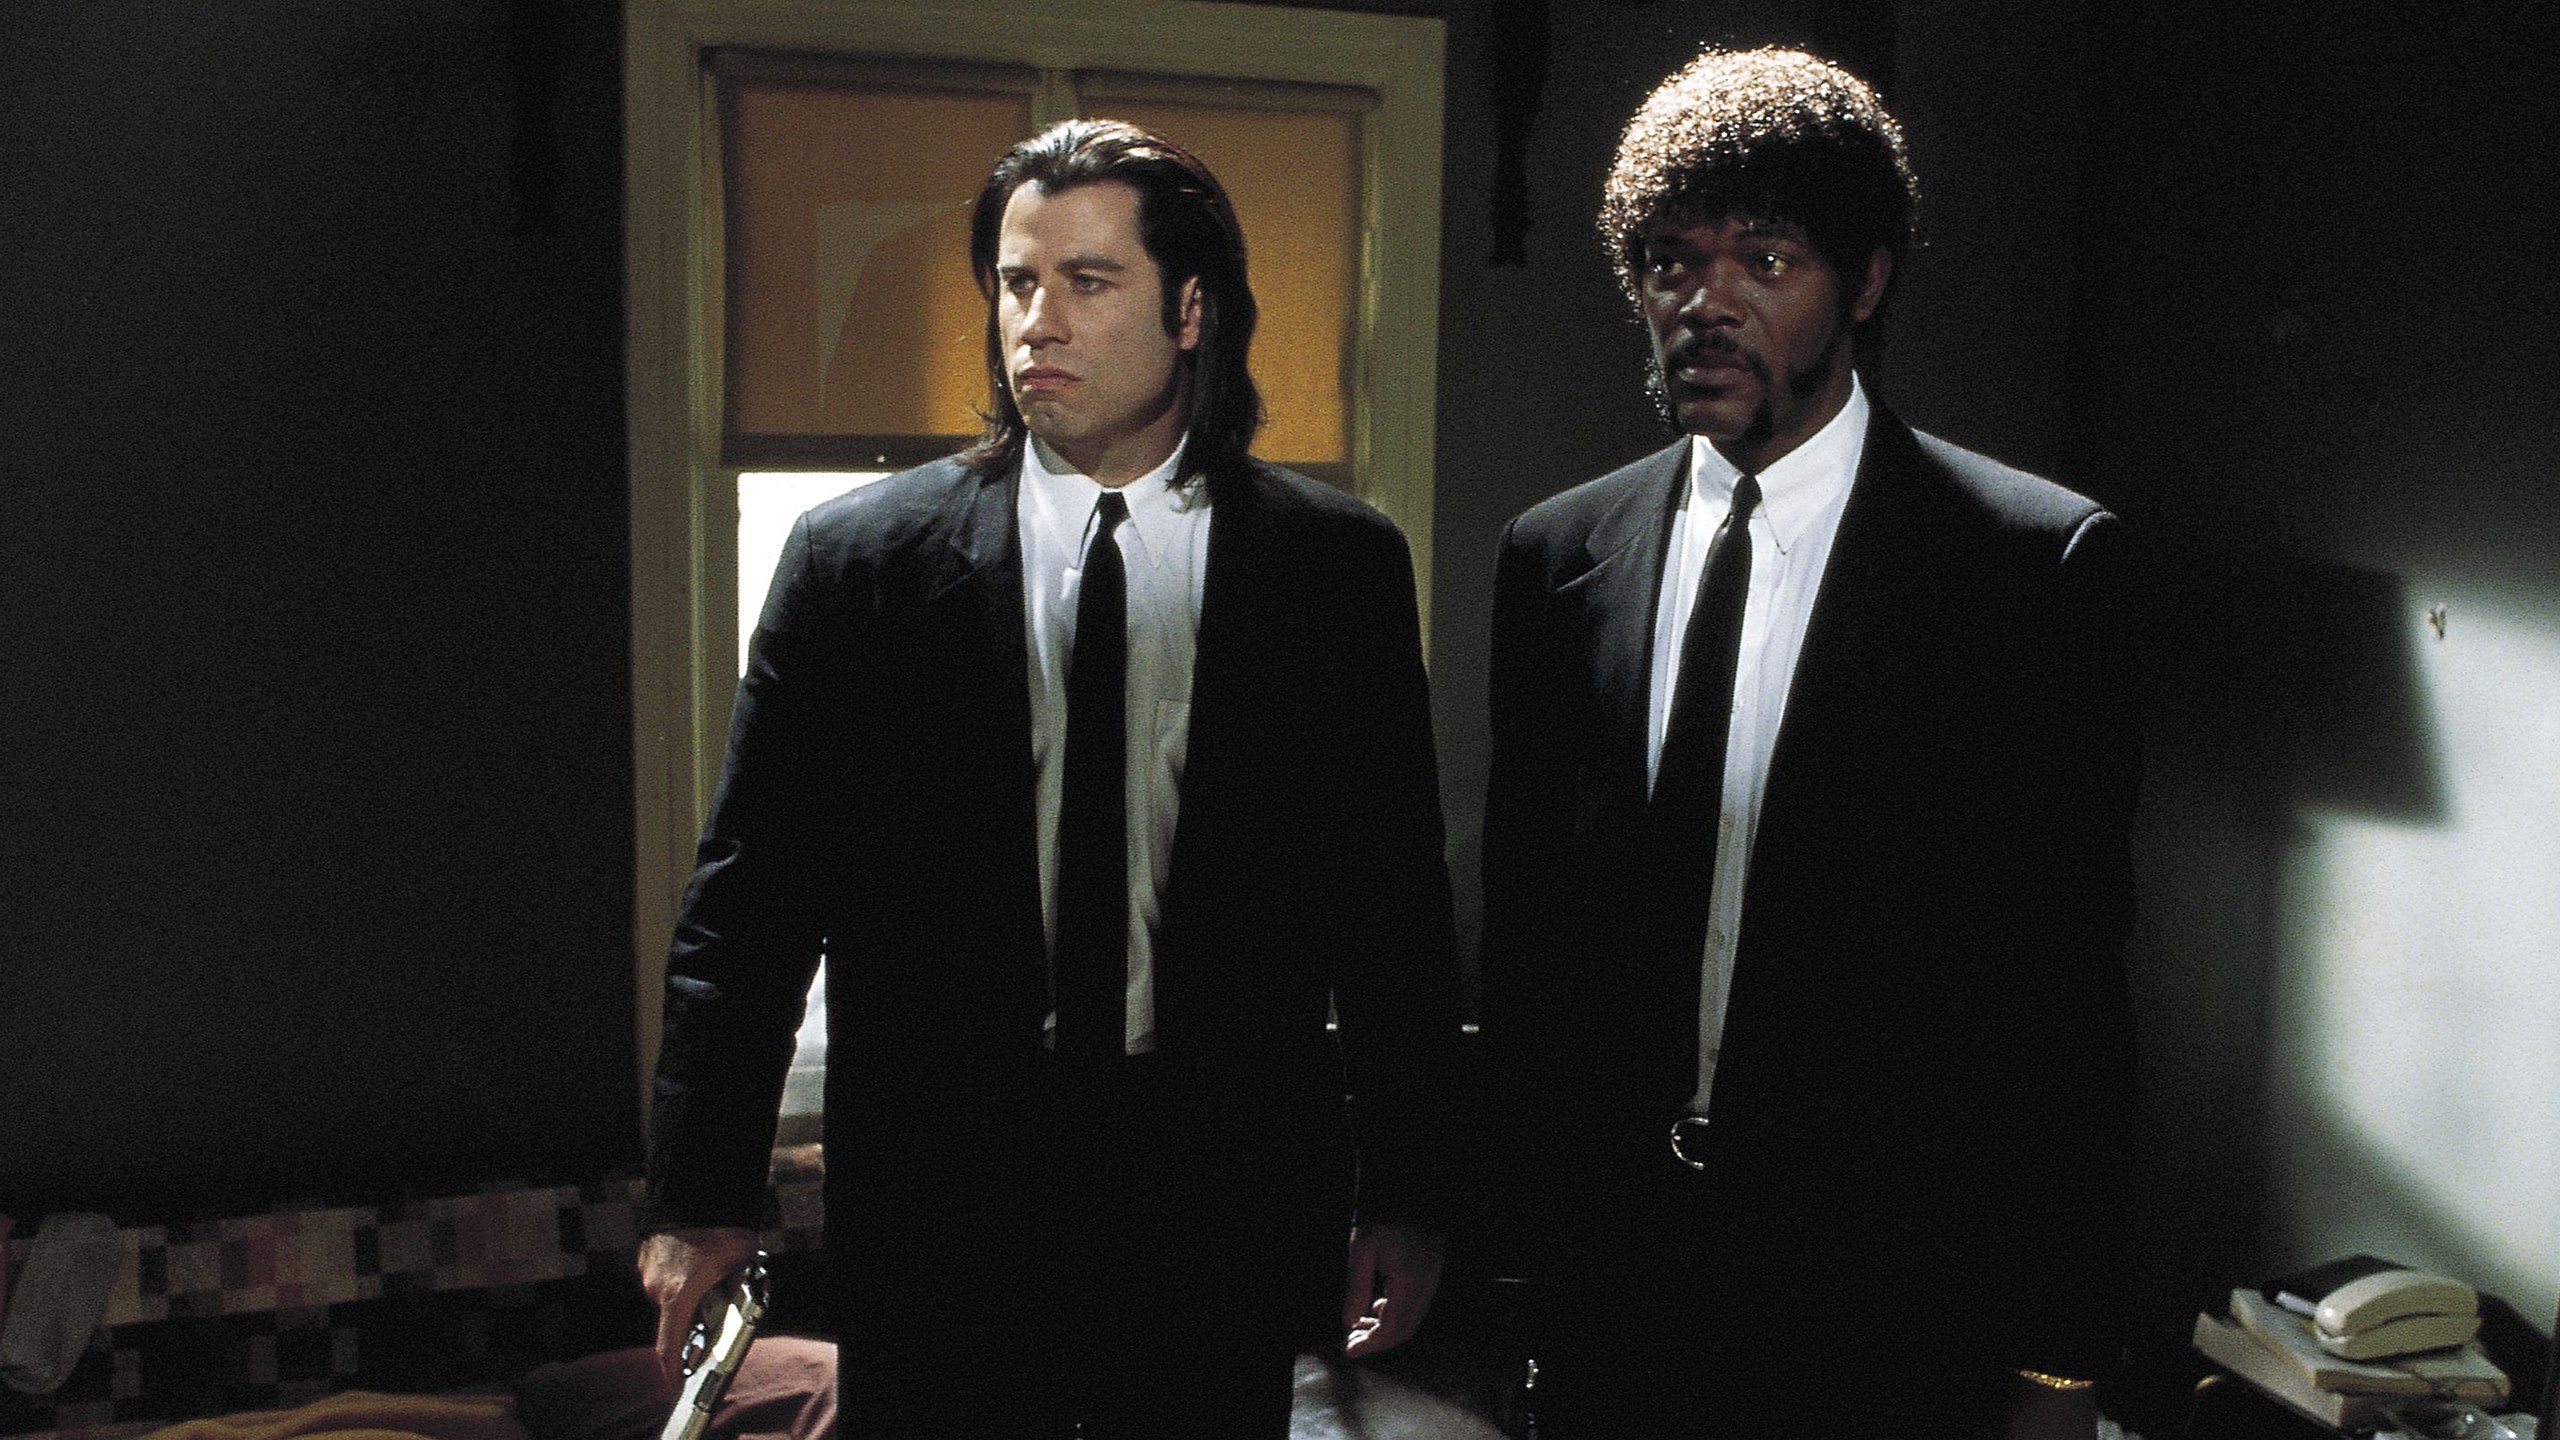 Pulp Fiction for 2560x1440 HDTV resolution